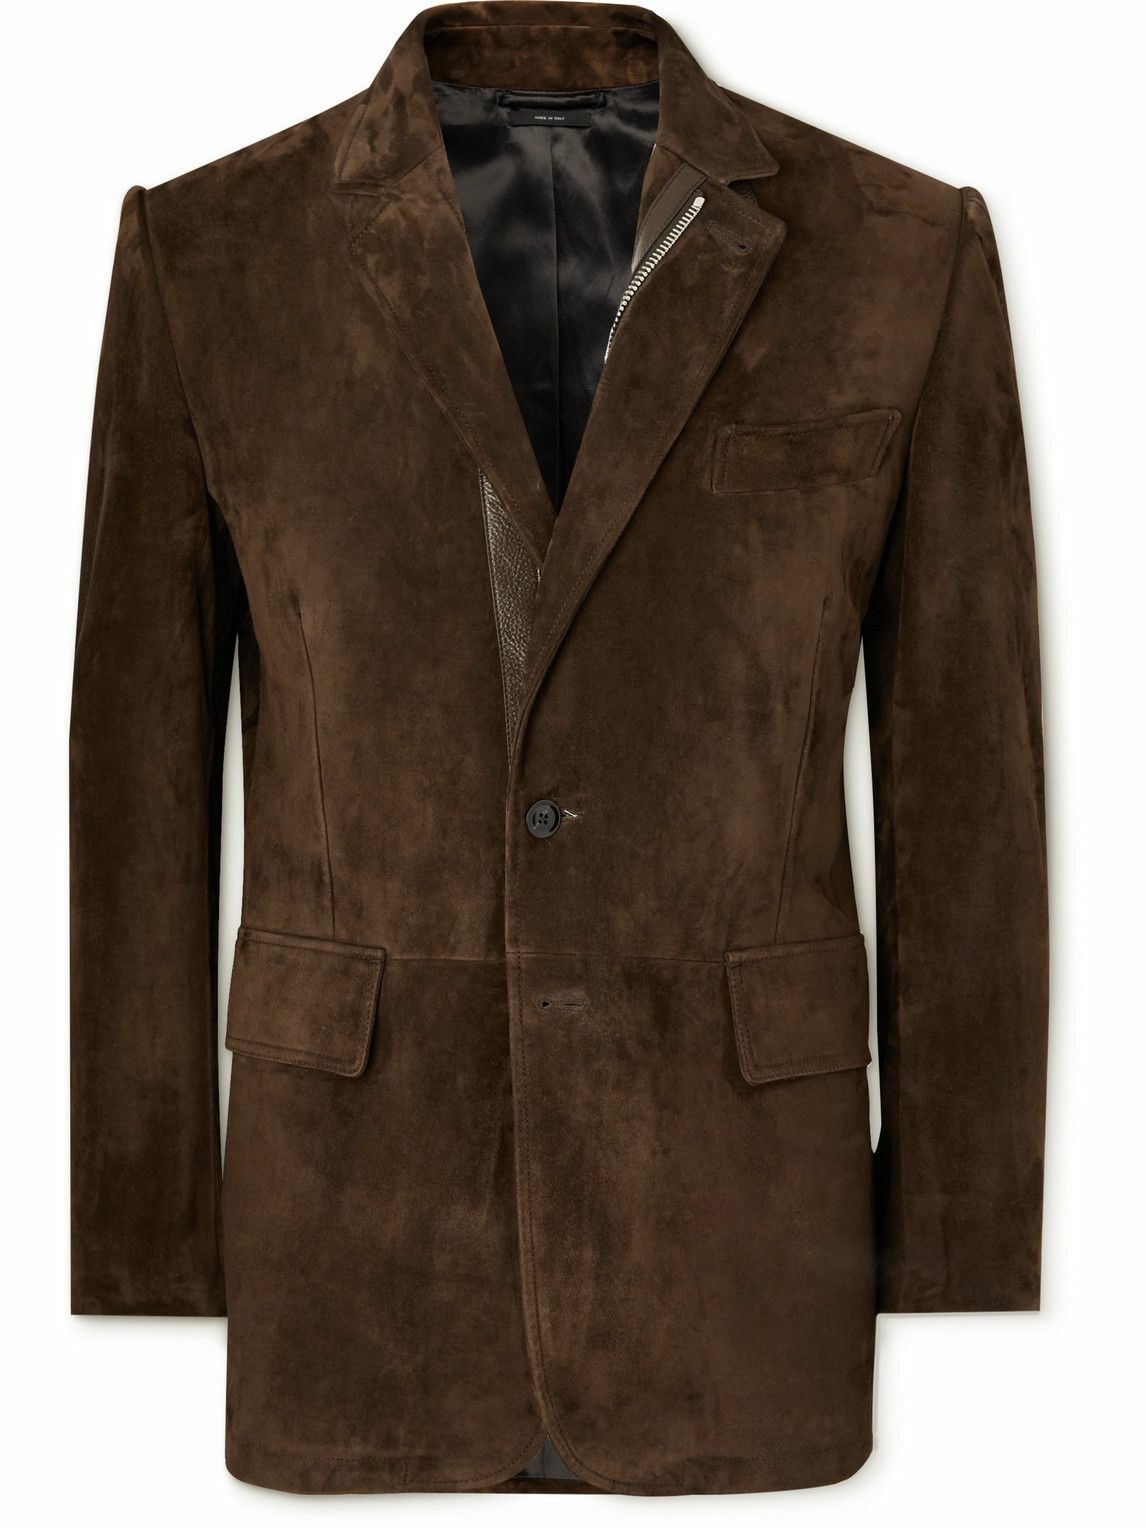 TOM FORD - Leather-Trimmed Suede Blazer - Brown TOM FORD